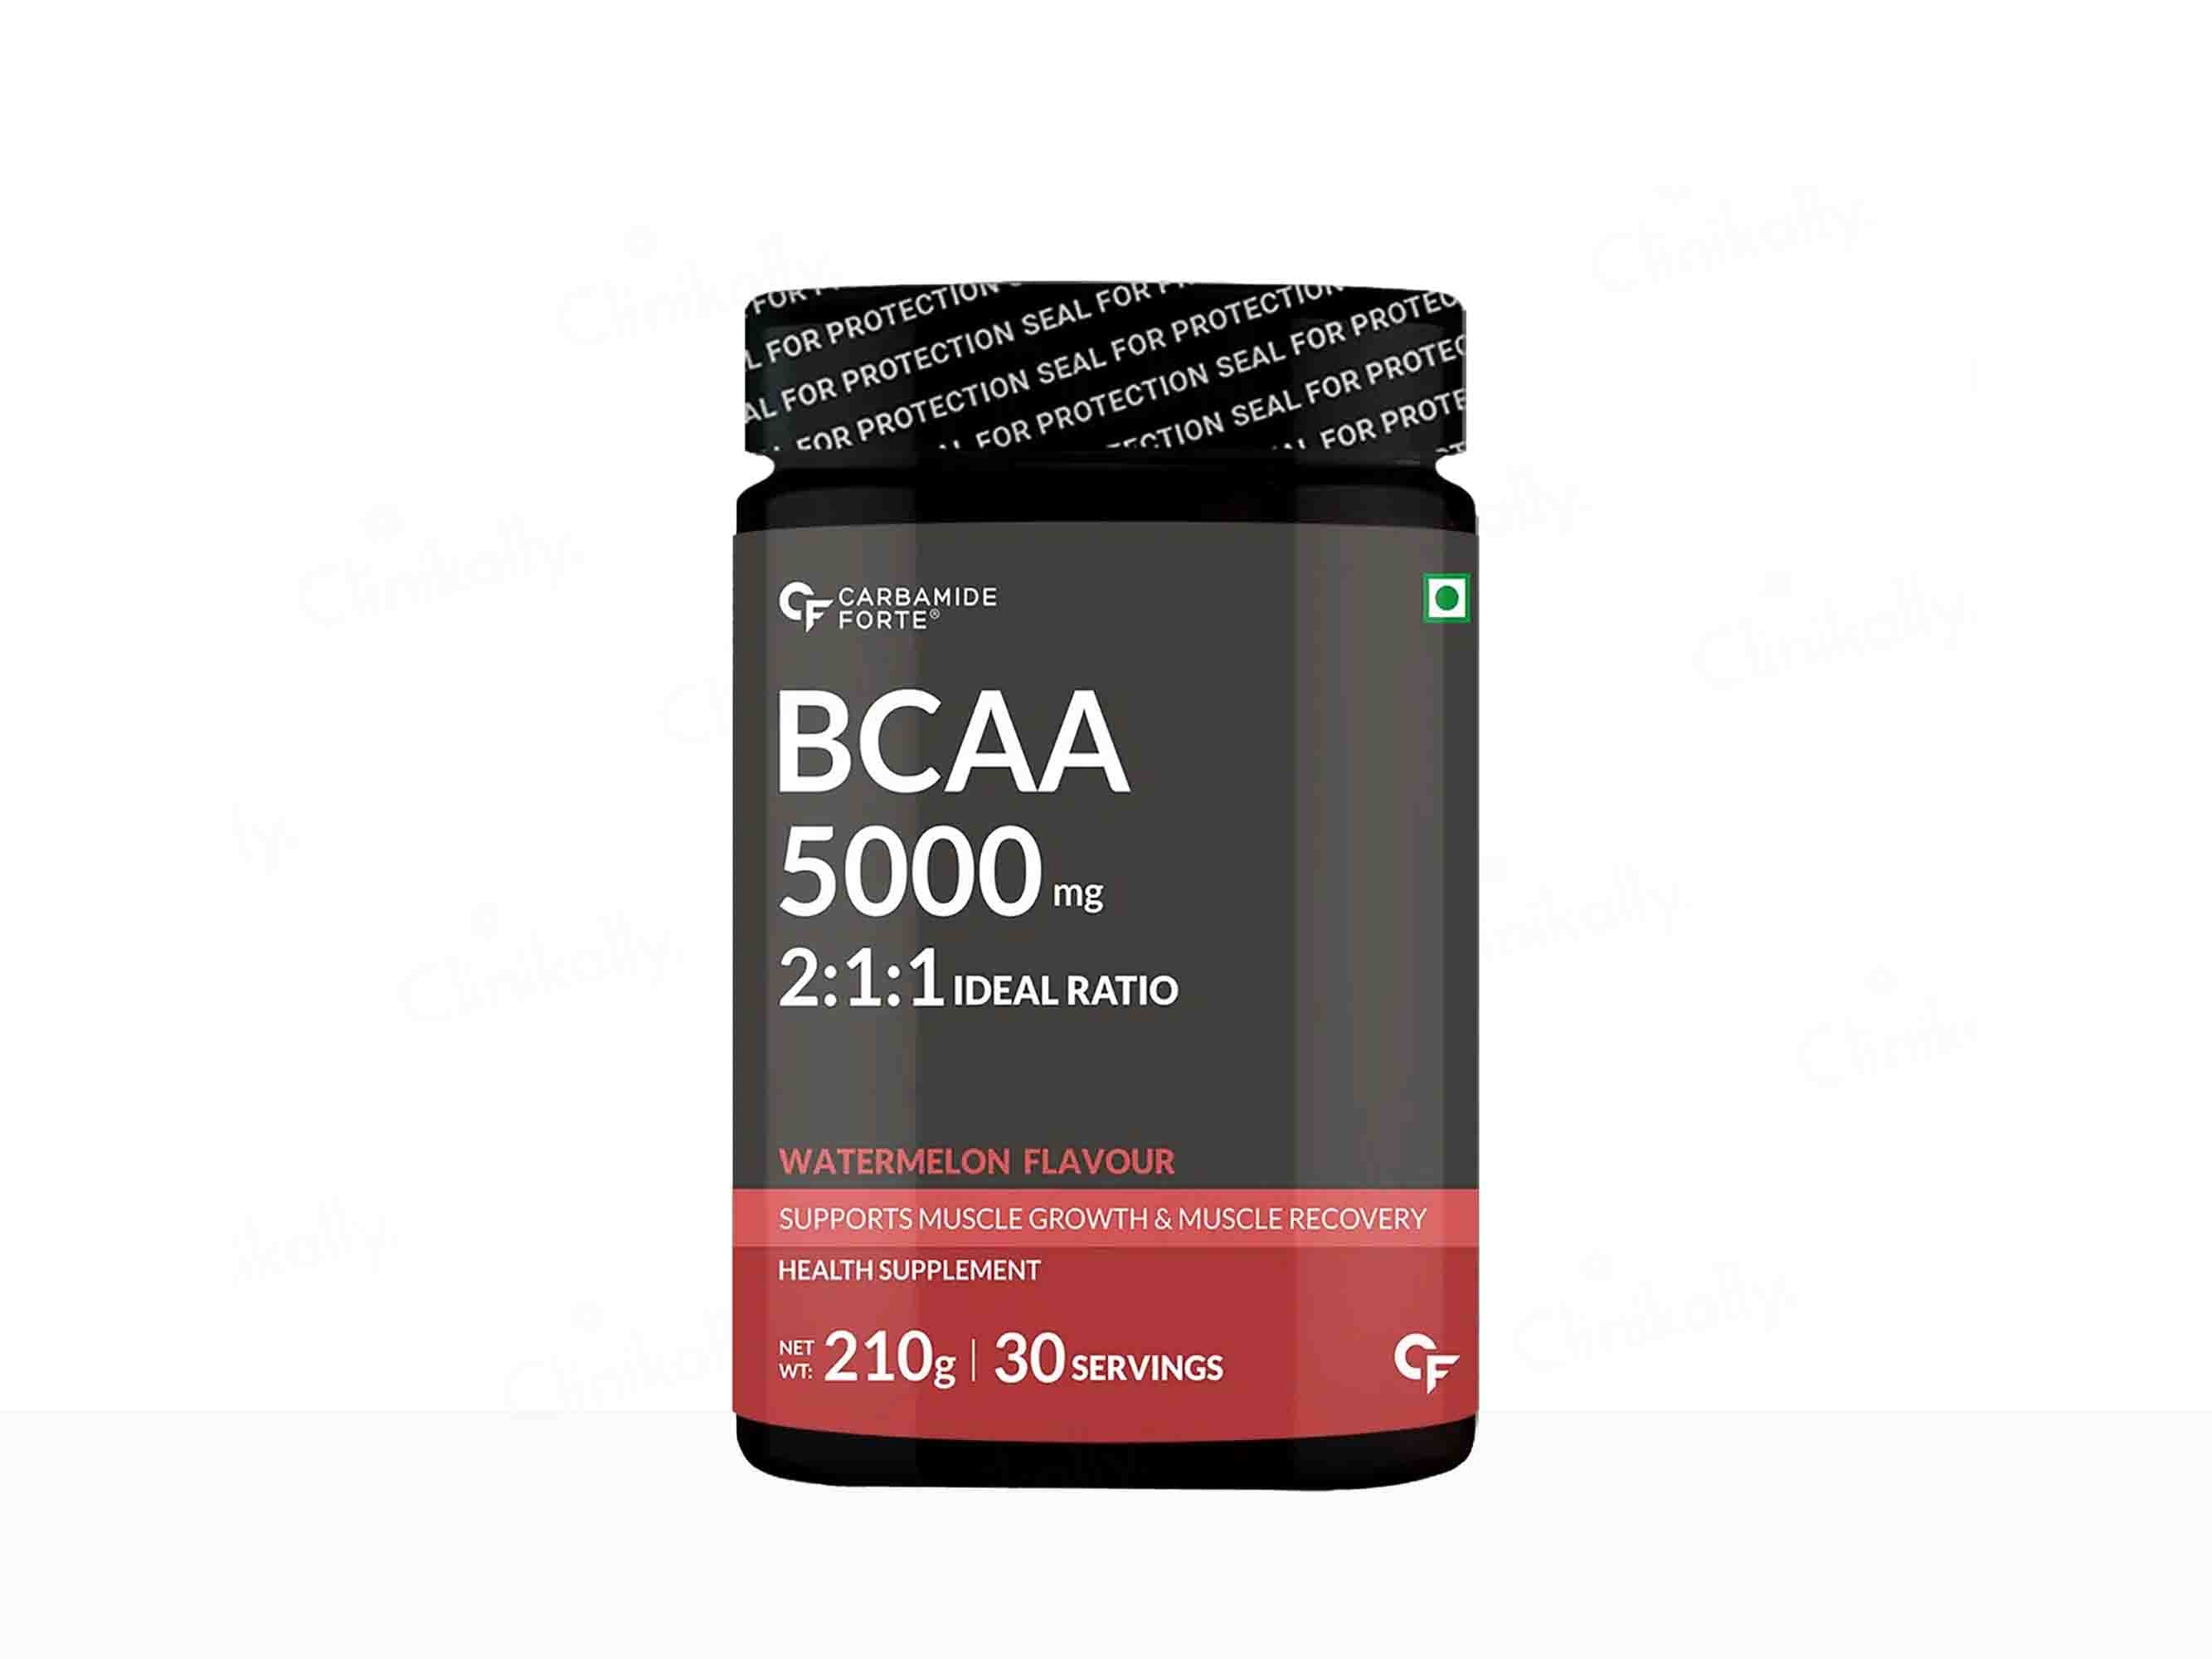 Carbamide Forte BCAA 5000mg Powder - Watermelon Flavour